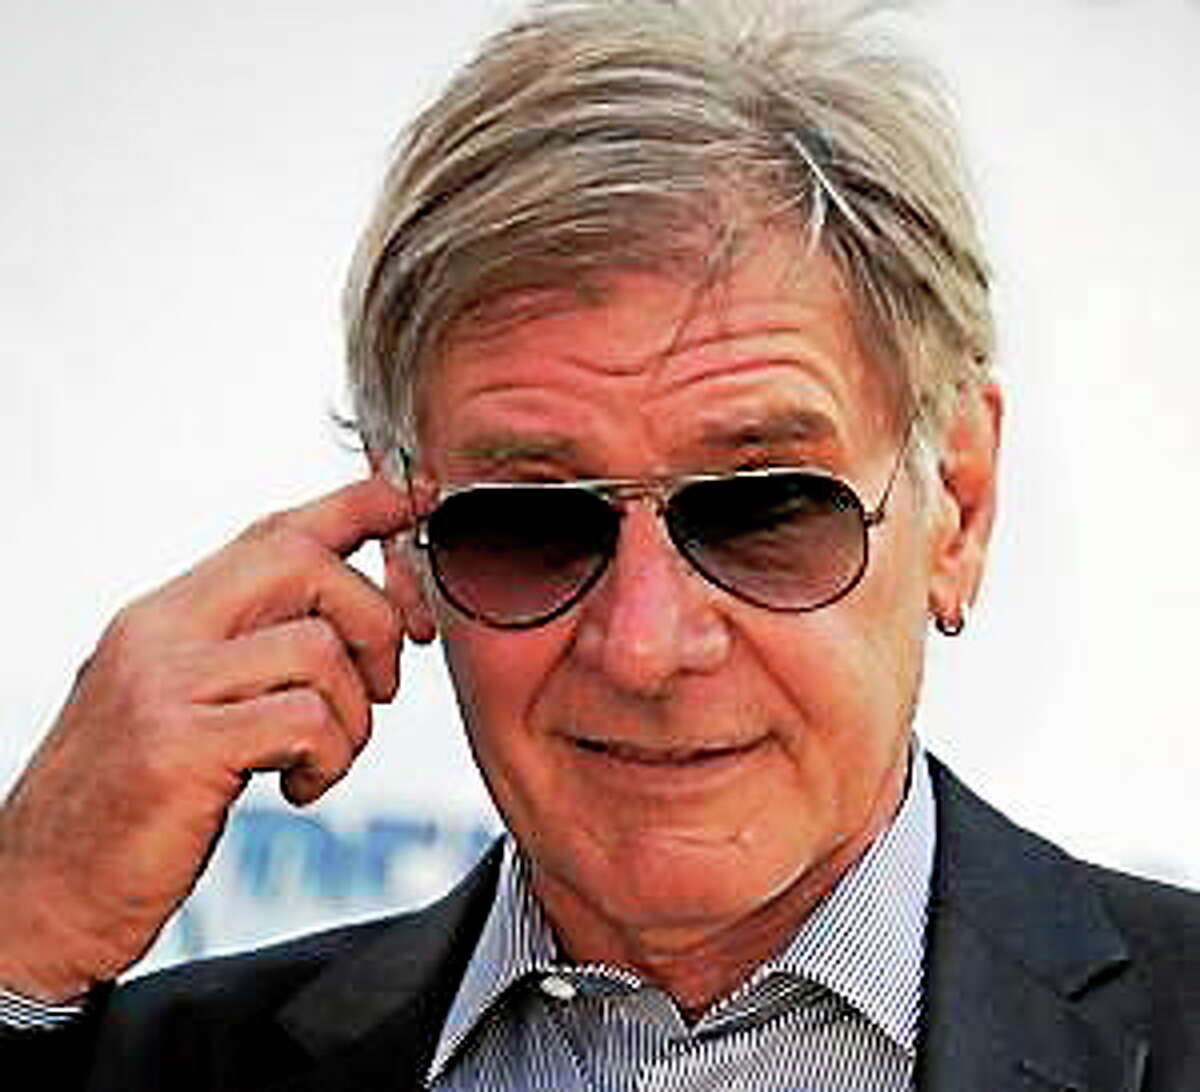 Harrison Ford during a photo call for The Expendables 3 at the 67th international film festival, Cannes, southern France, Sunday, May 18, 2014.